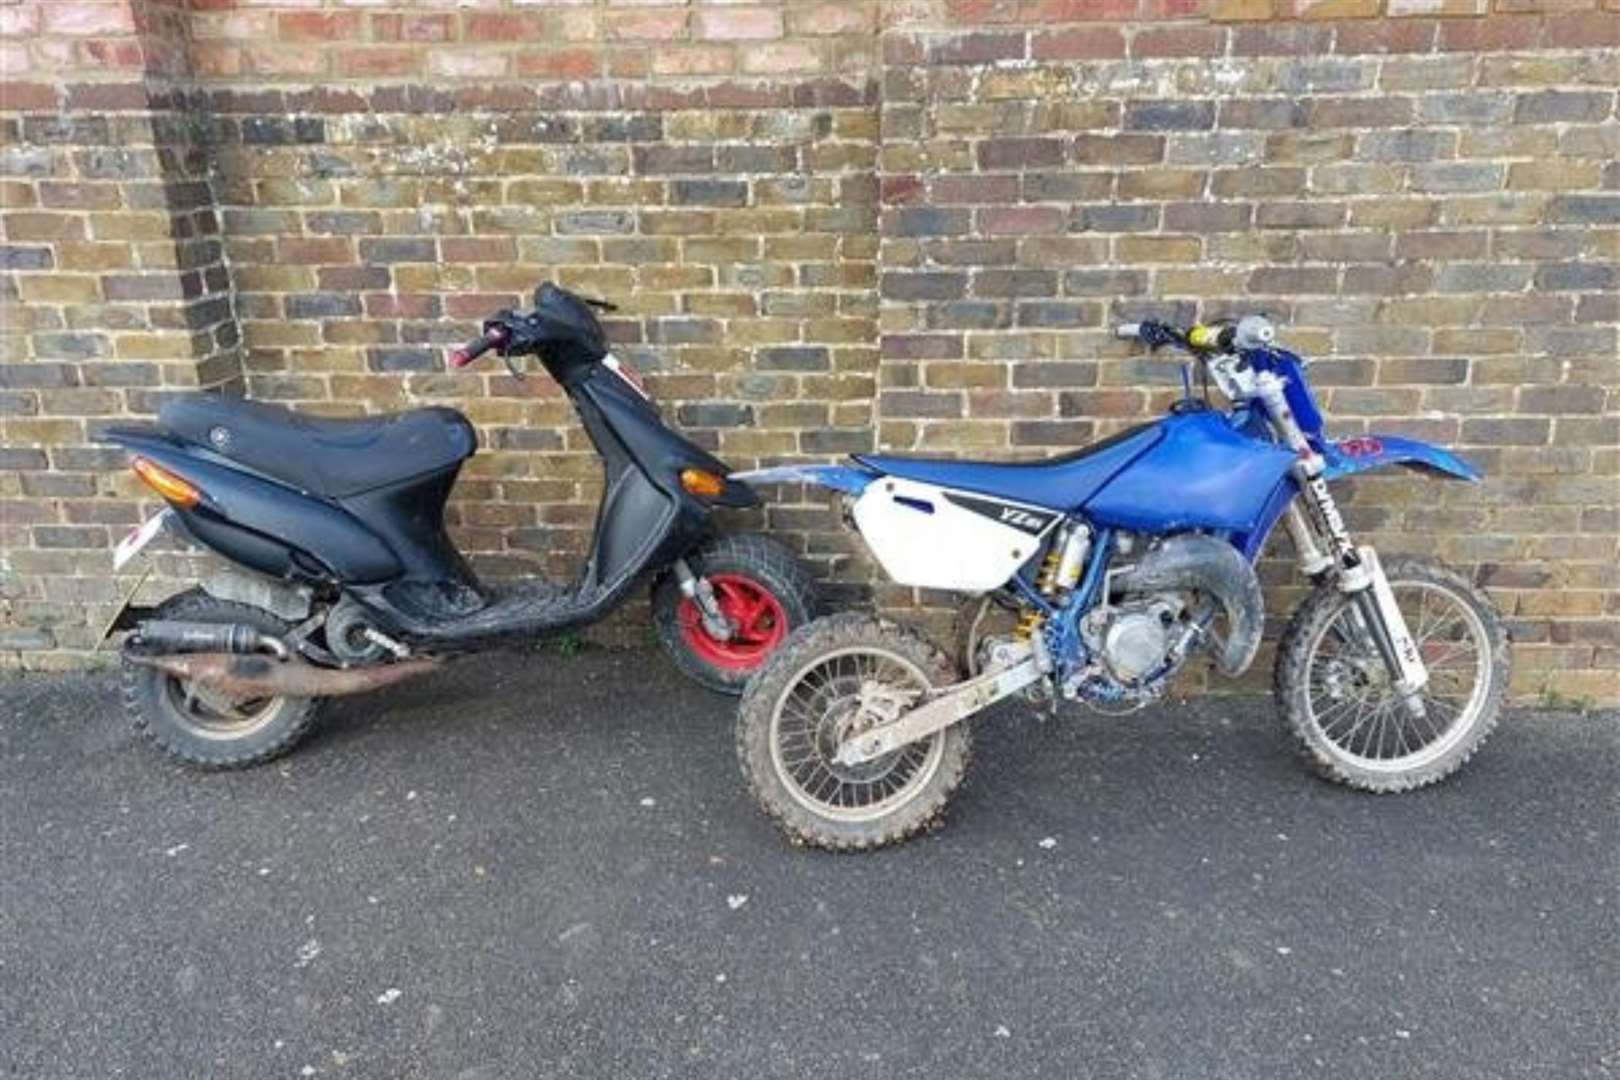 A moped and a dirt bike have been seized in Ashford. Photo: Kent Police (63198718)